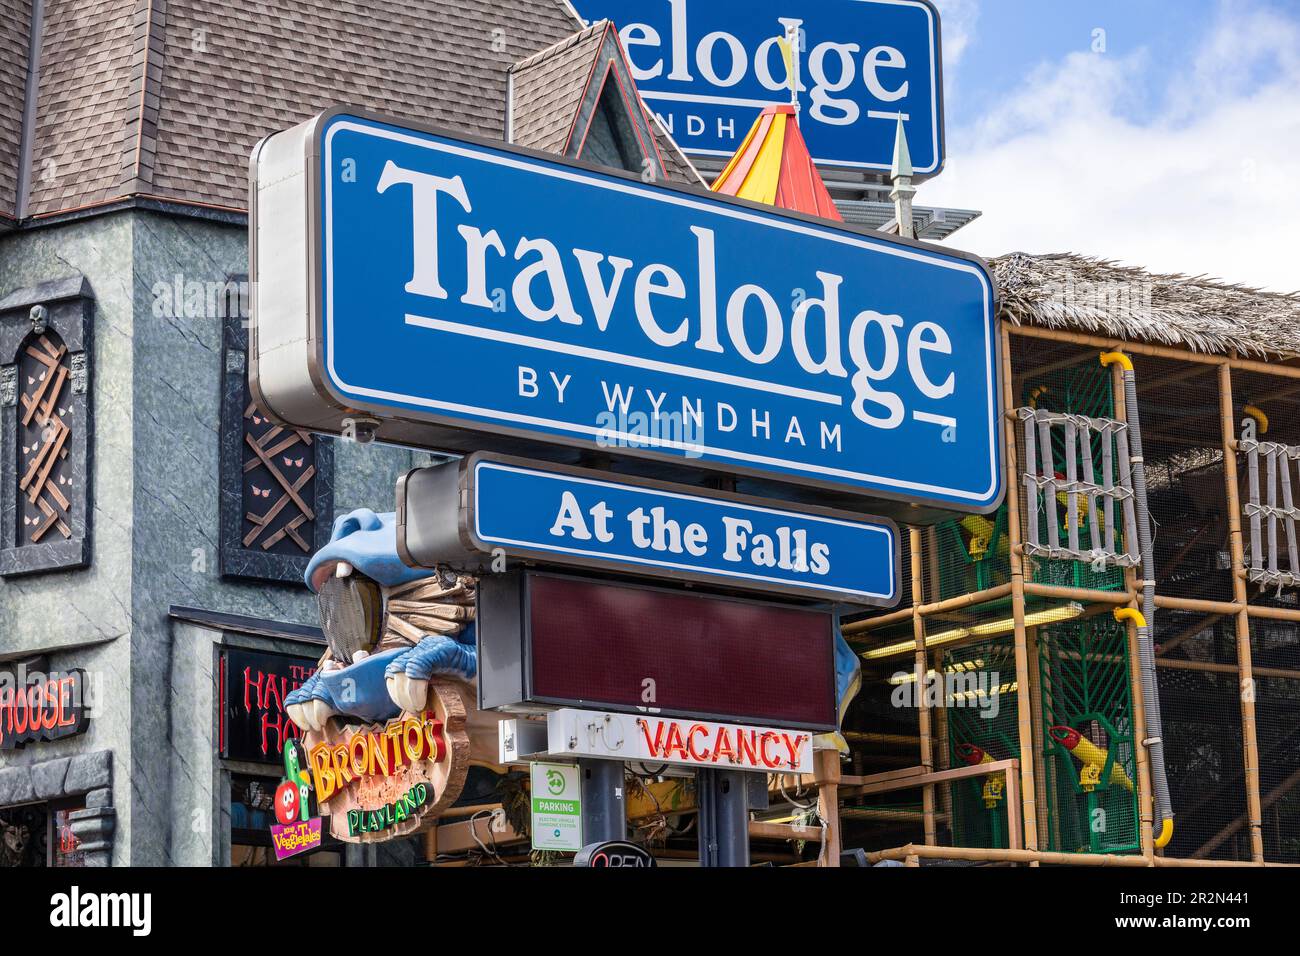 Travelodge By Wyndham Hotel Sign Clifton Hill Niagara Falls Ontario Canada Budget Tourist Hotel Chain Stock Photo